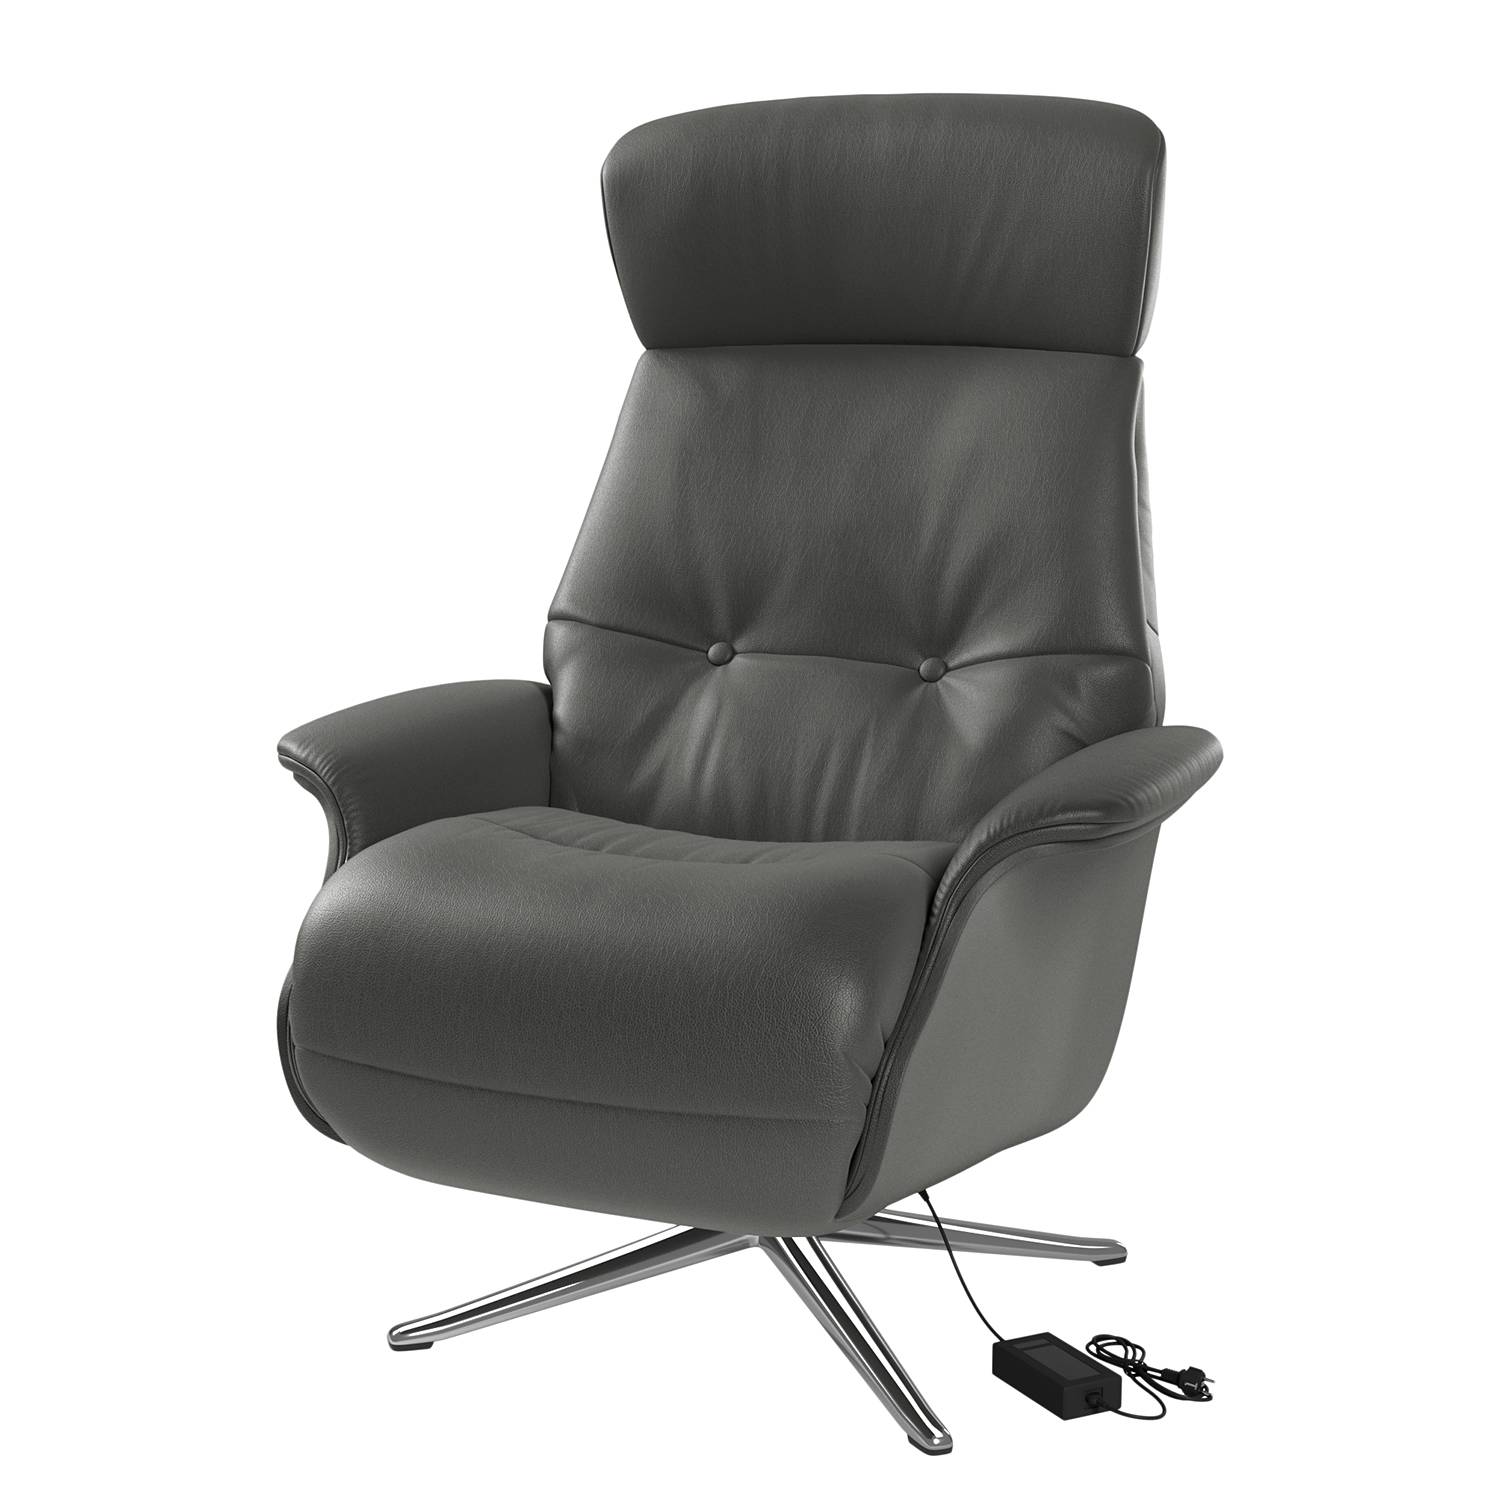 Image of Fauteuil relax Anderson VI 000000001000131468